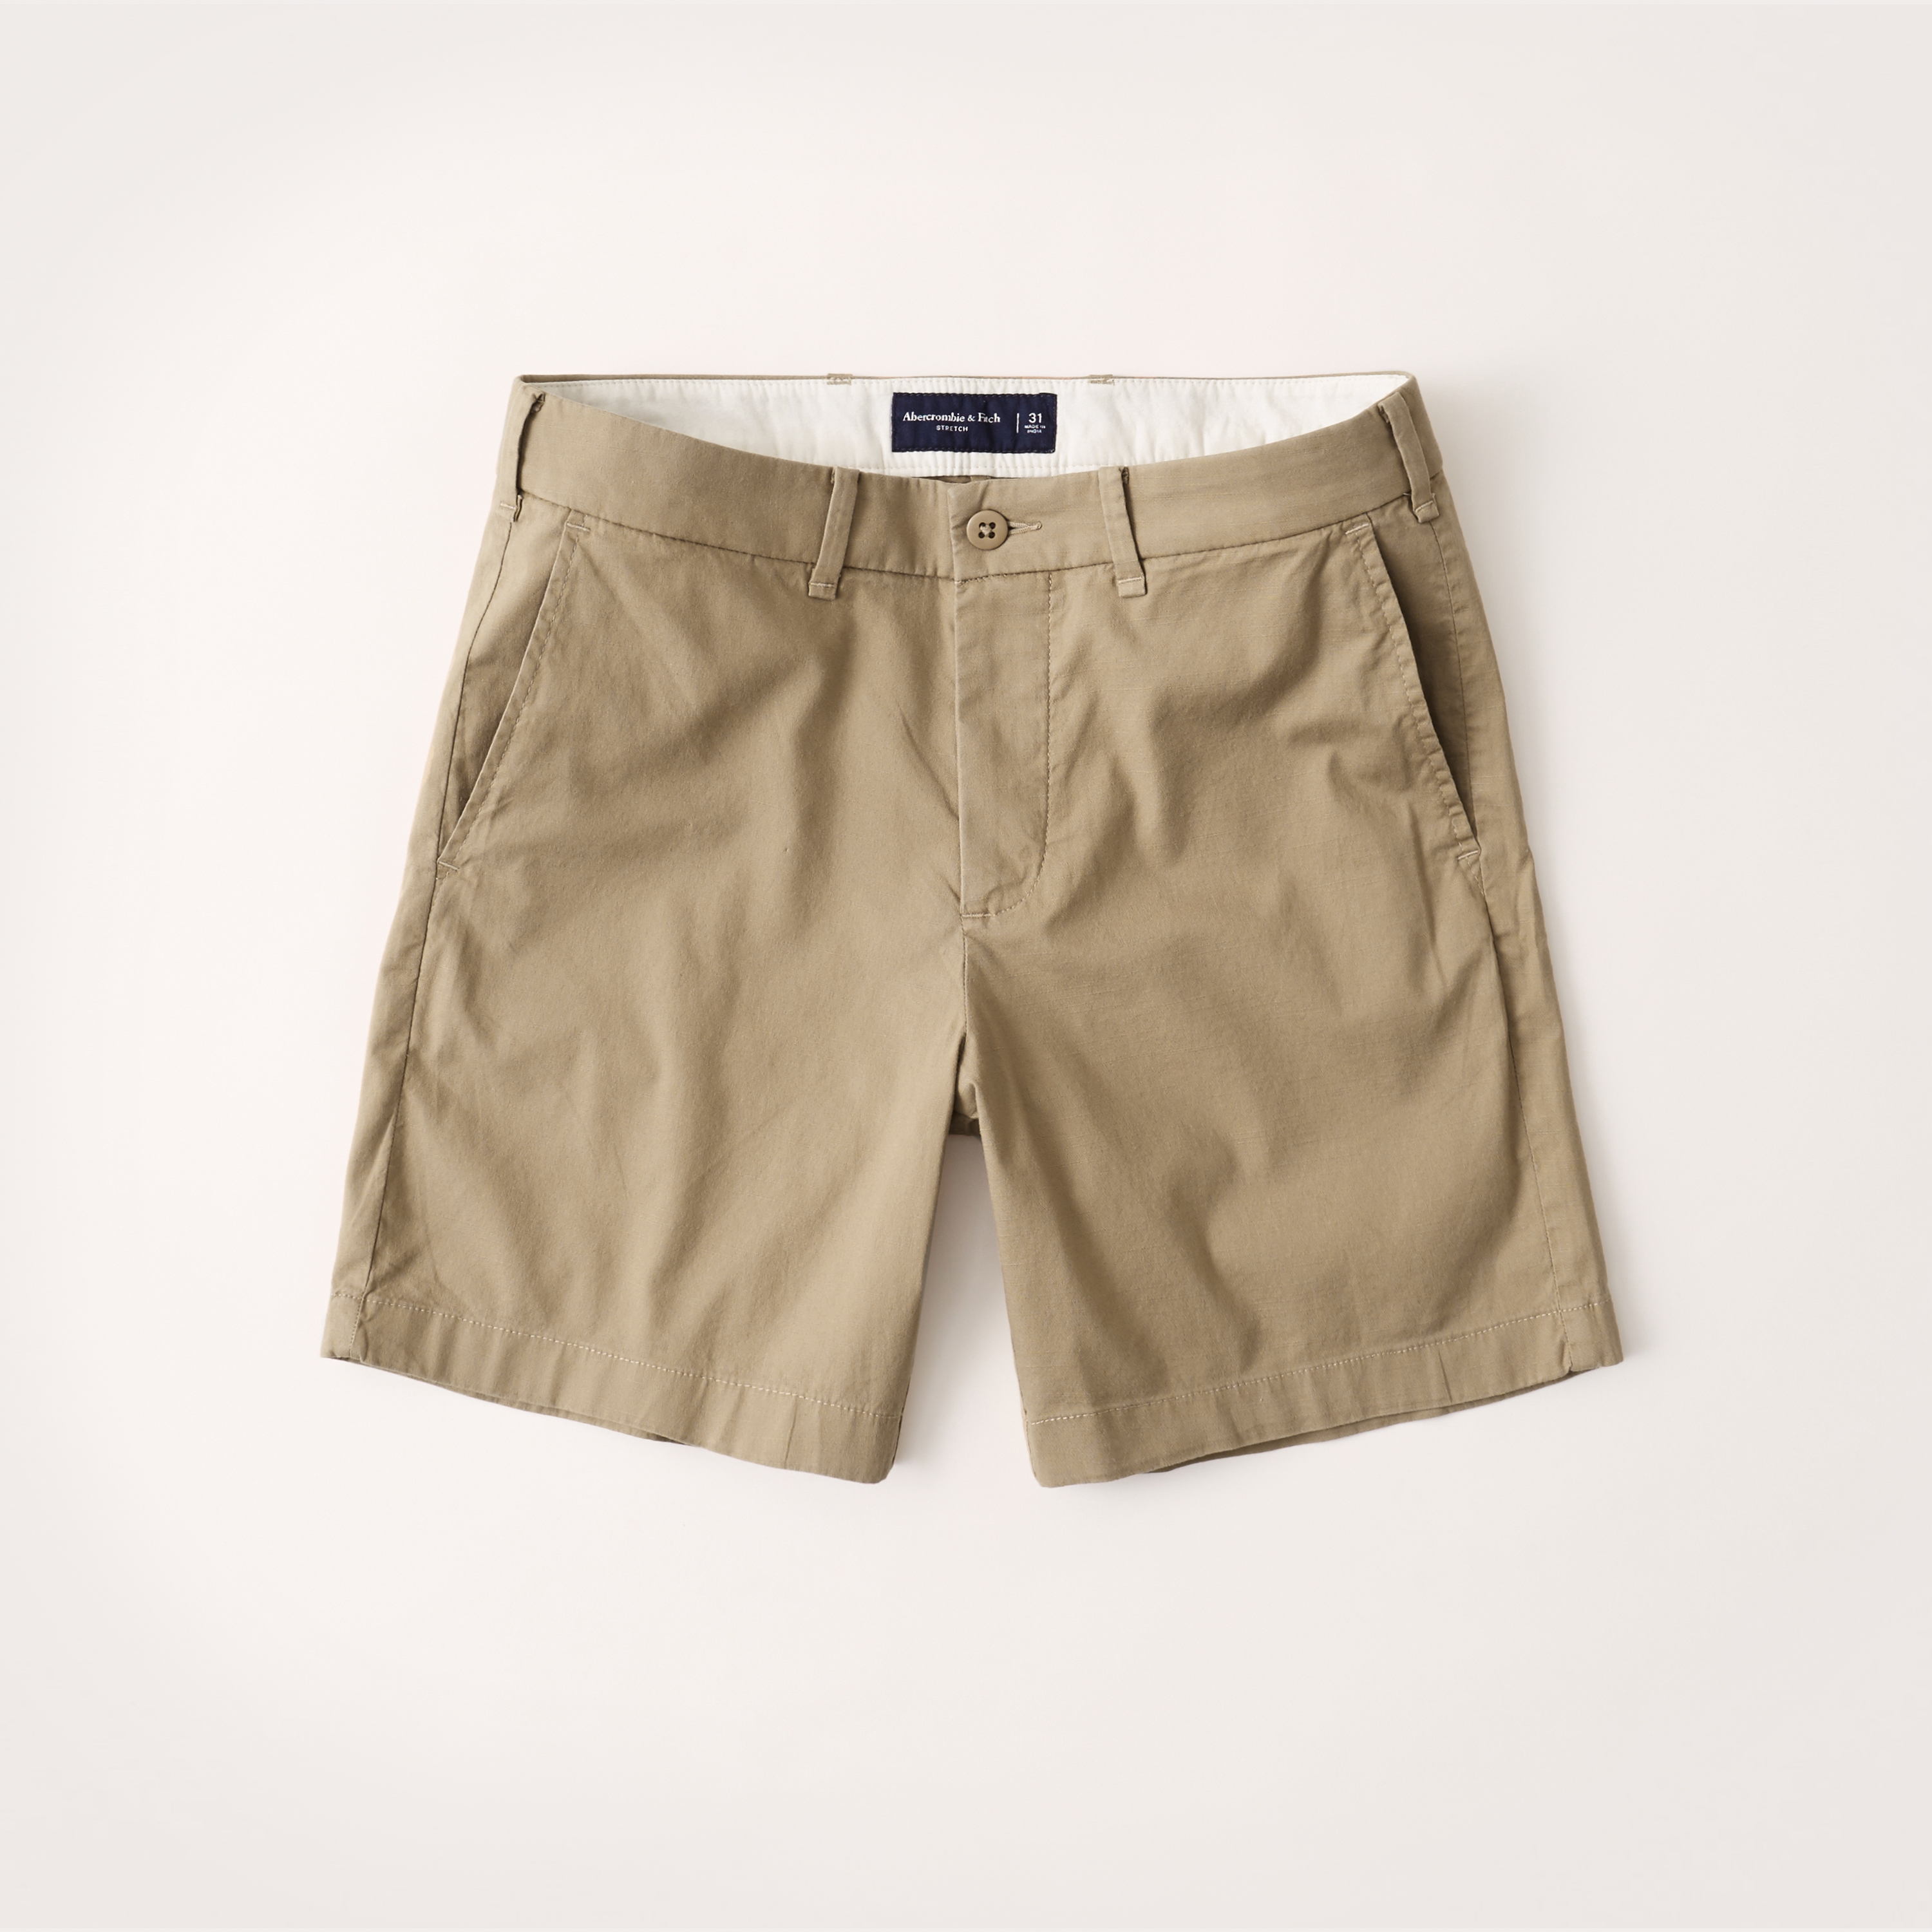 abercrombie & fitch shorts mens